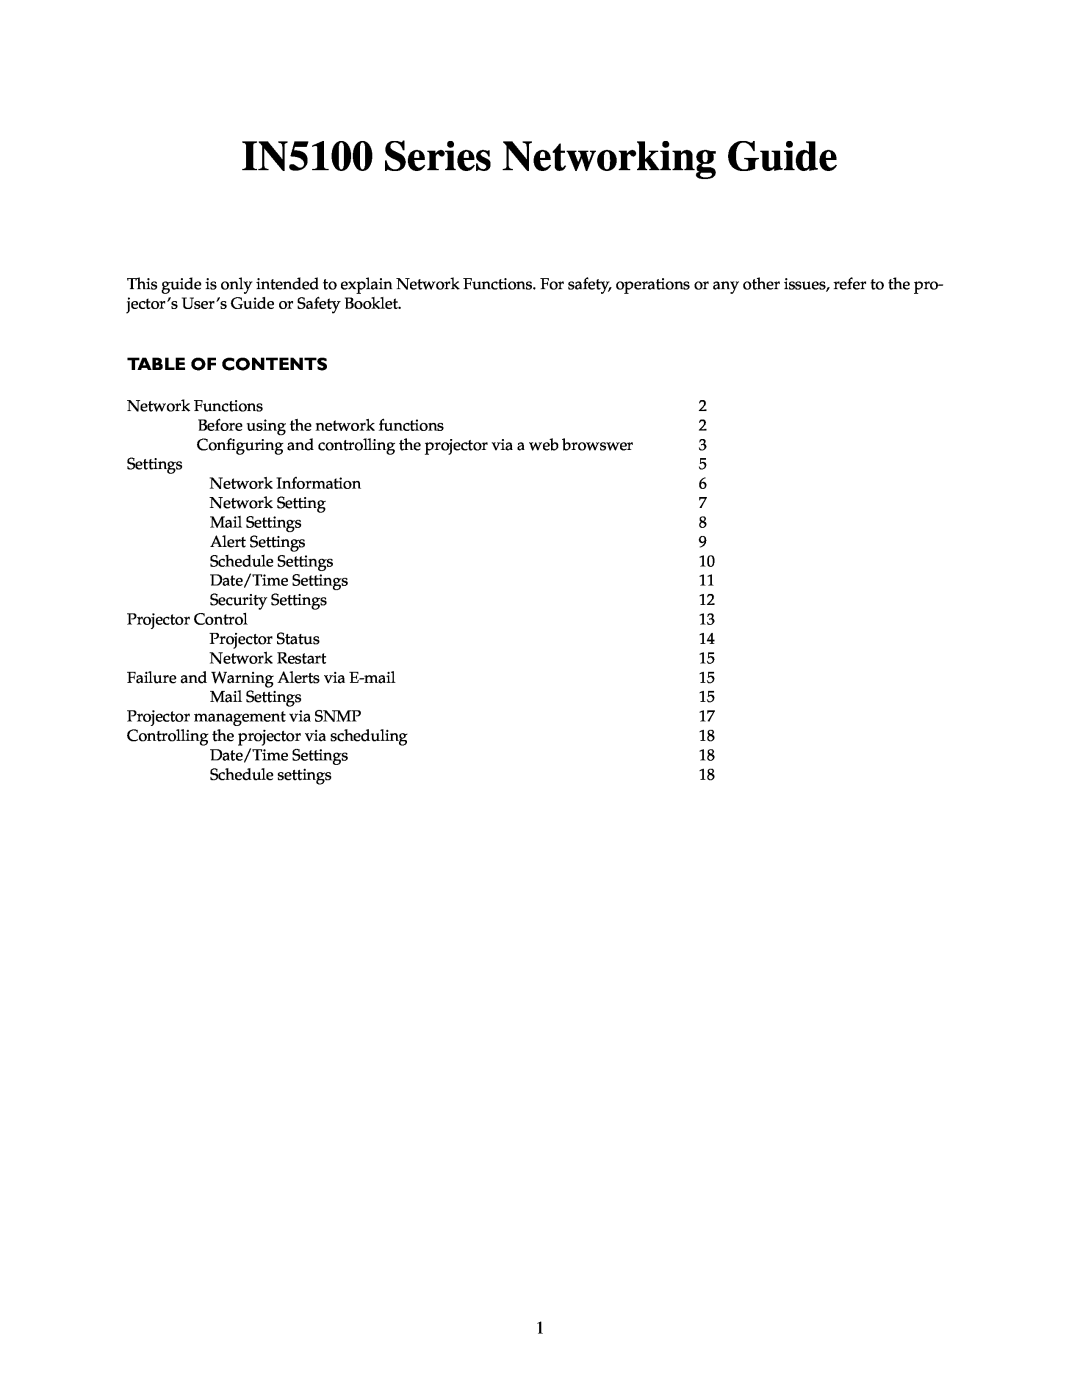 InFocus manual Table Of Contents, IN5100 Series Networking Guide 